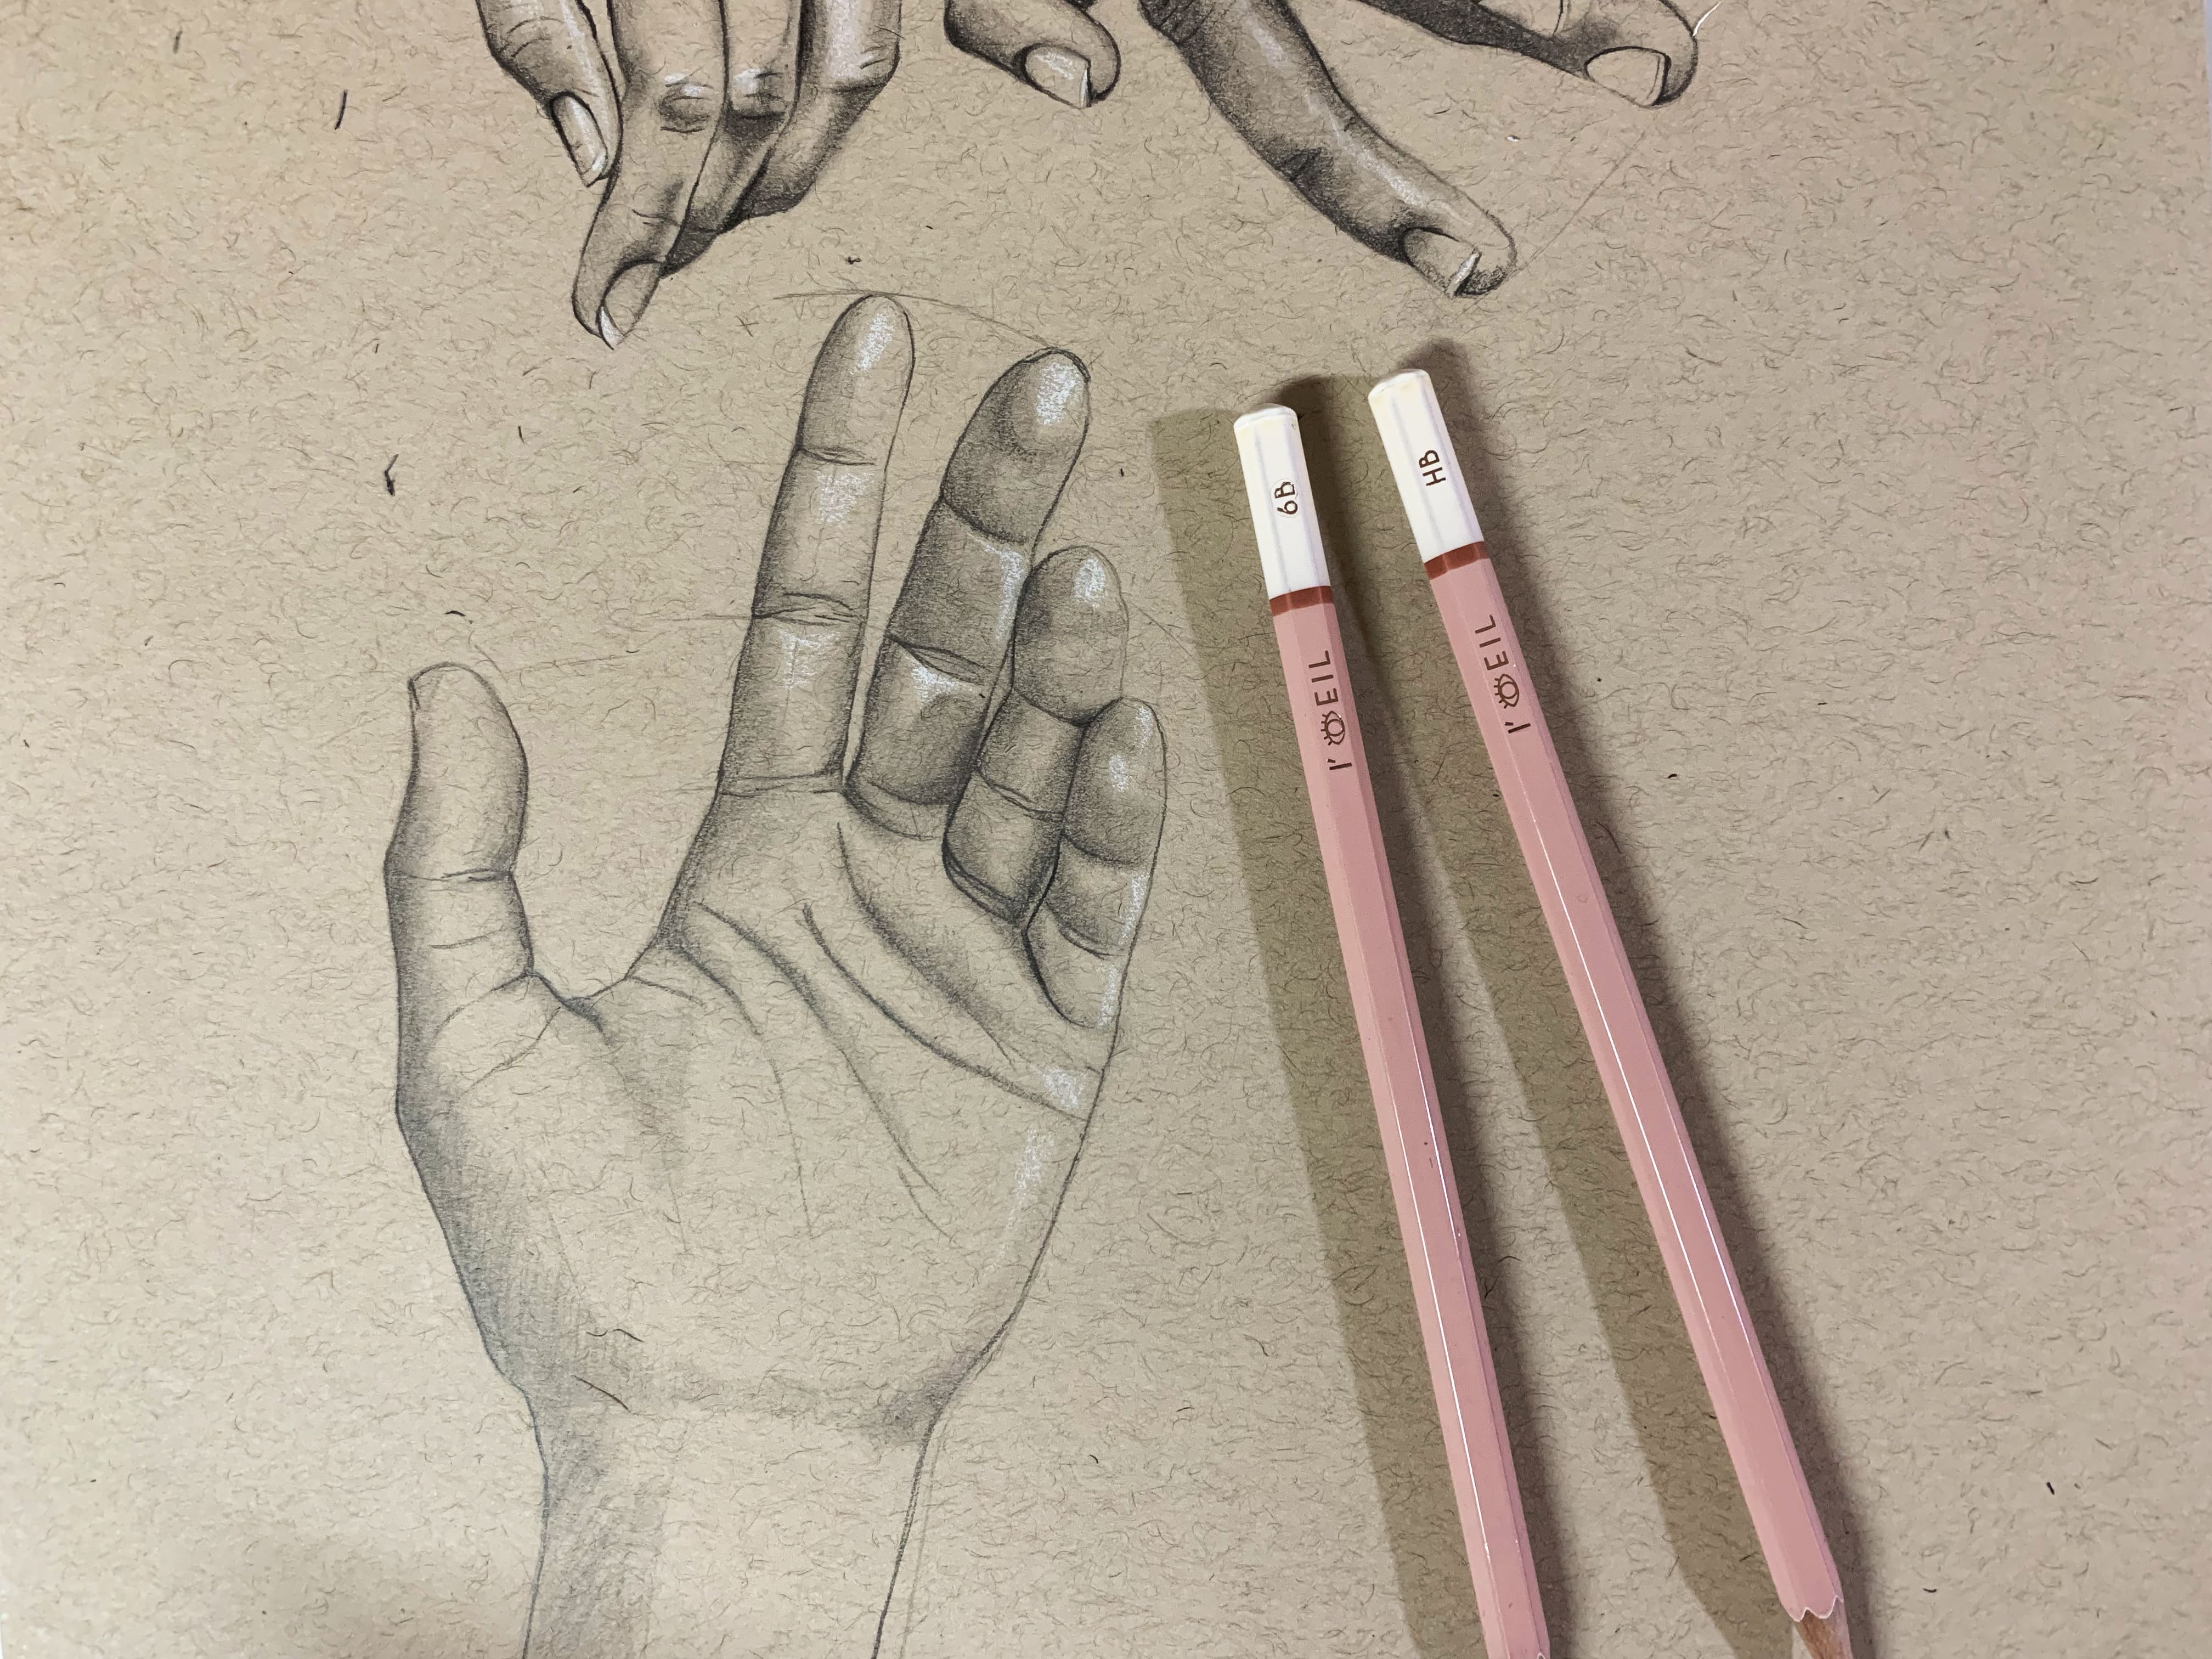 https://loeilart.com/cdn/shop/articles/How_to_draw_hands_a_basic_guiding_tutorial_for_beginners_guide_easy_step_by_step_fast_simple_shading_graphite_penci-03_4032x.jpg?v=1555693259